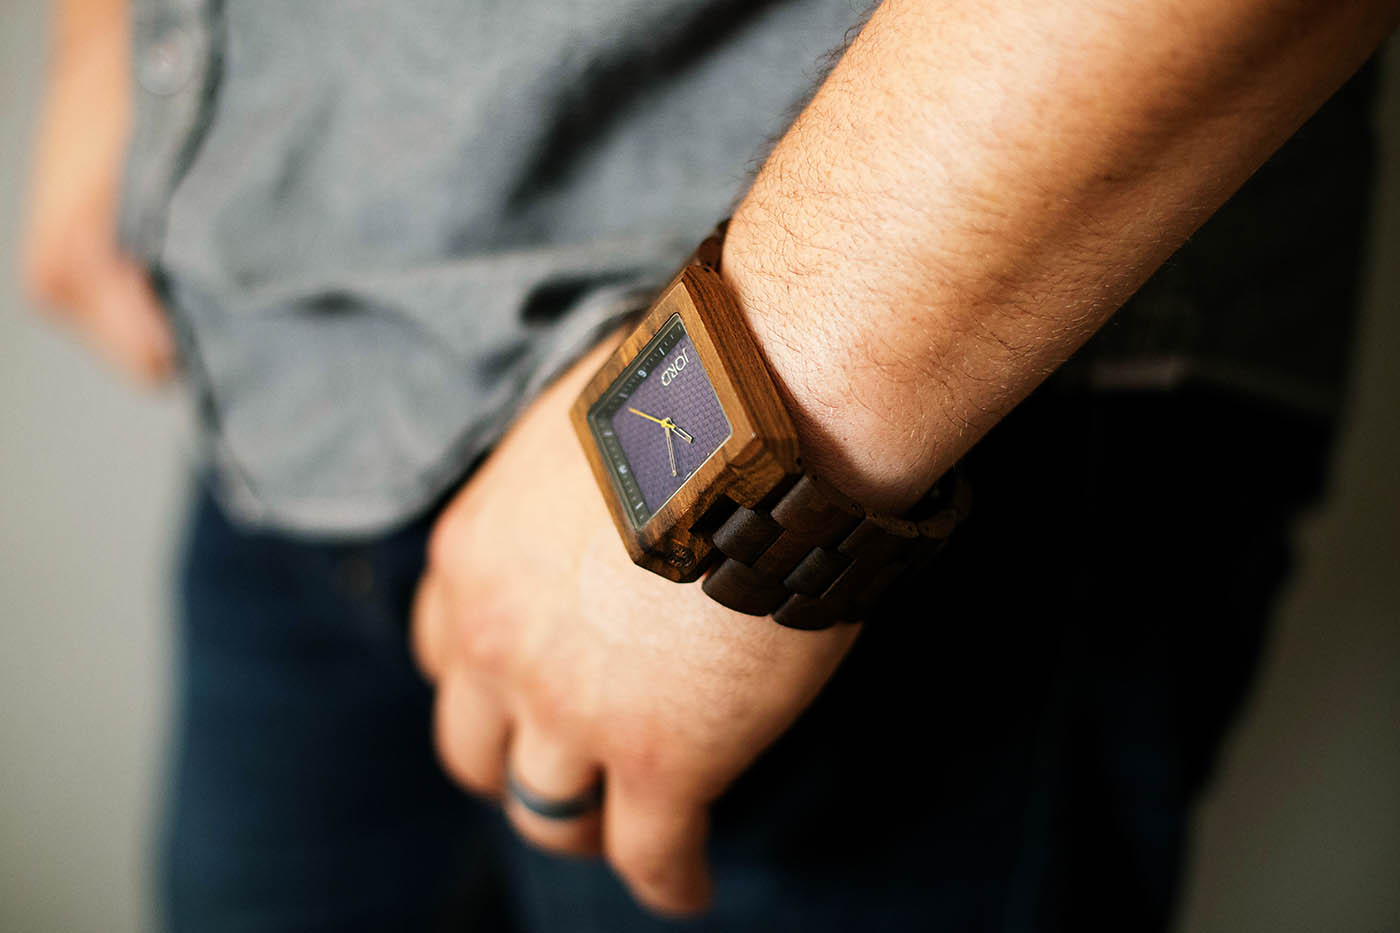 JORD wooden watches - truly gorgeous and a great gift idea for anyone!